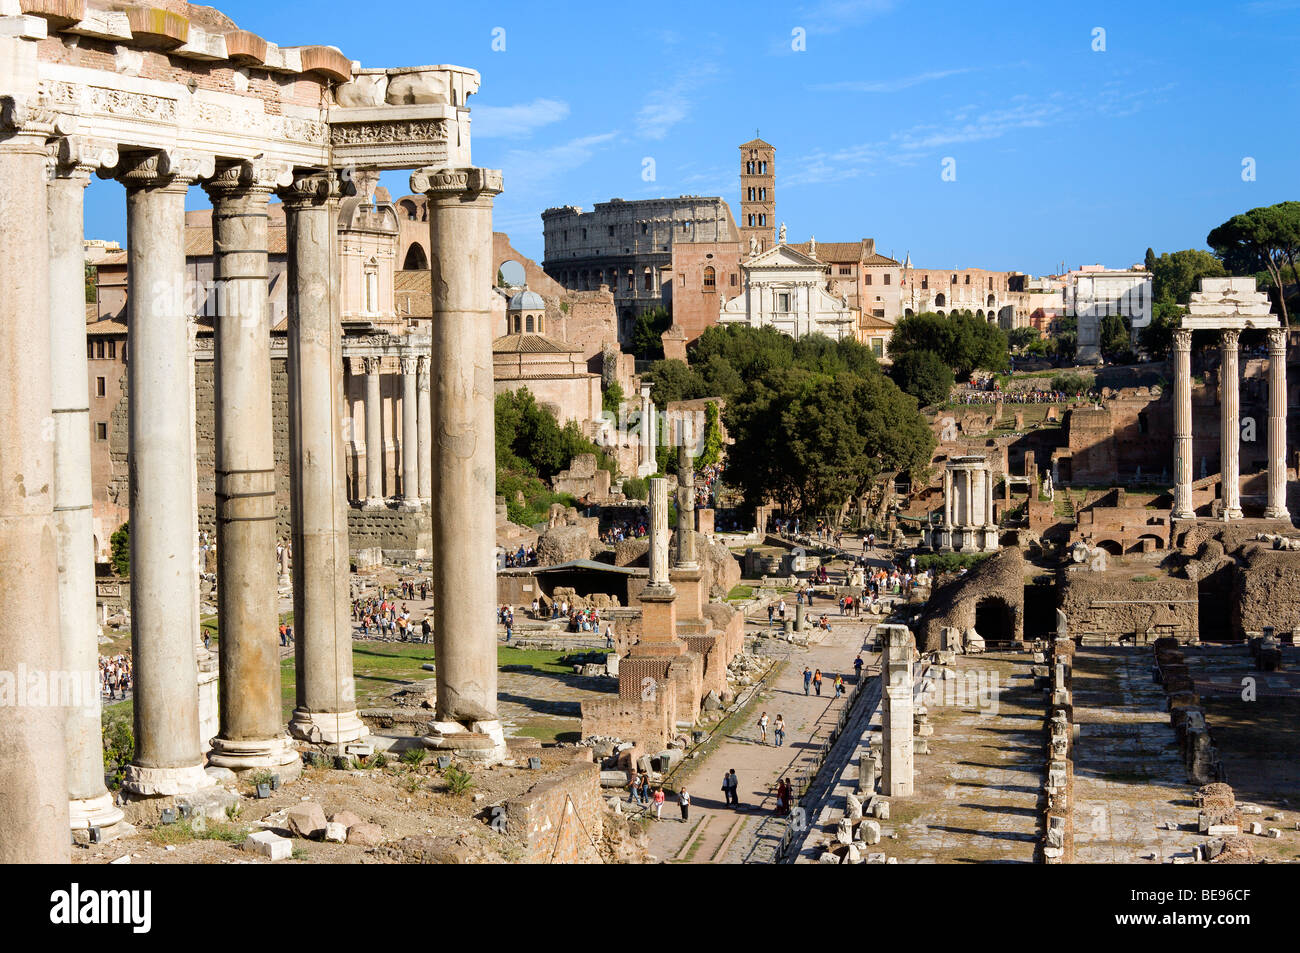 ITALY Rome Lazio Tourists in Forum. Columns of Temple of Saturn in foreground and Colosseum in distance Stock Photo